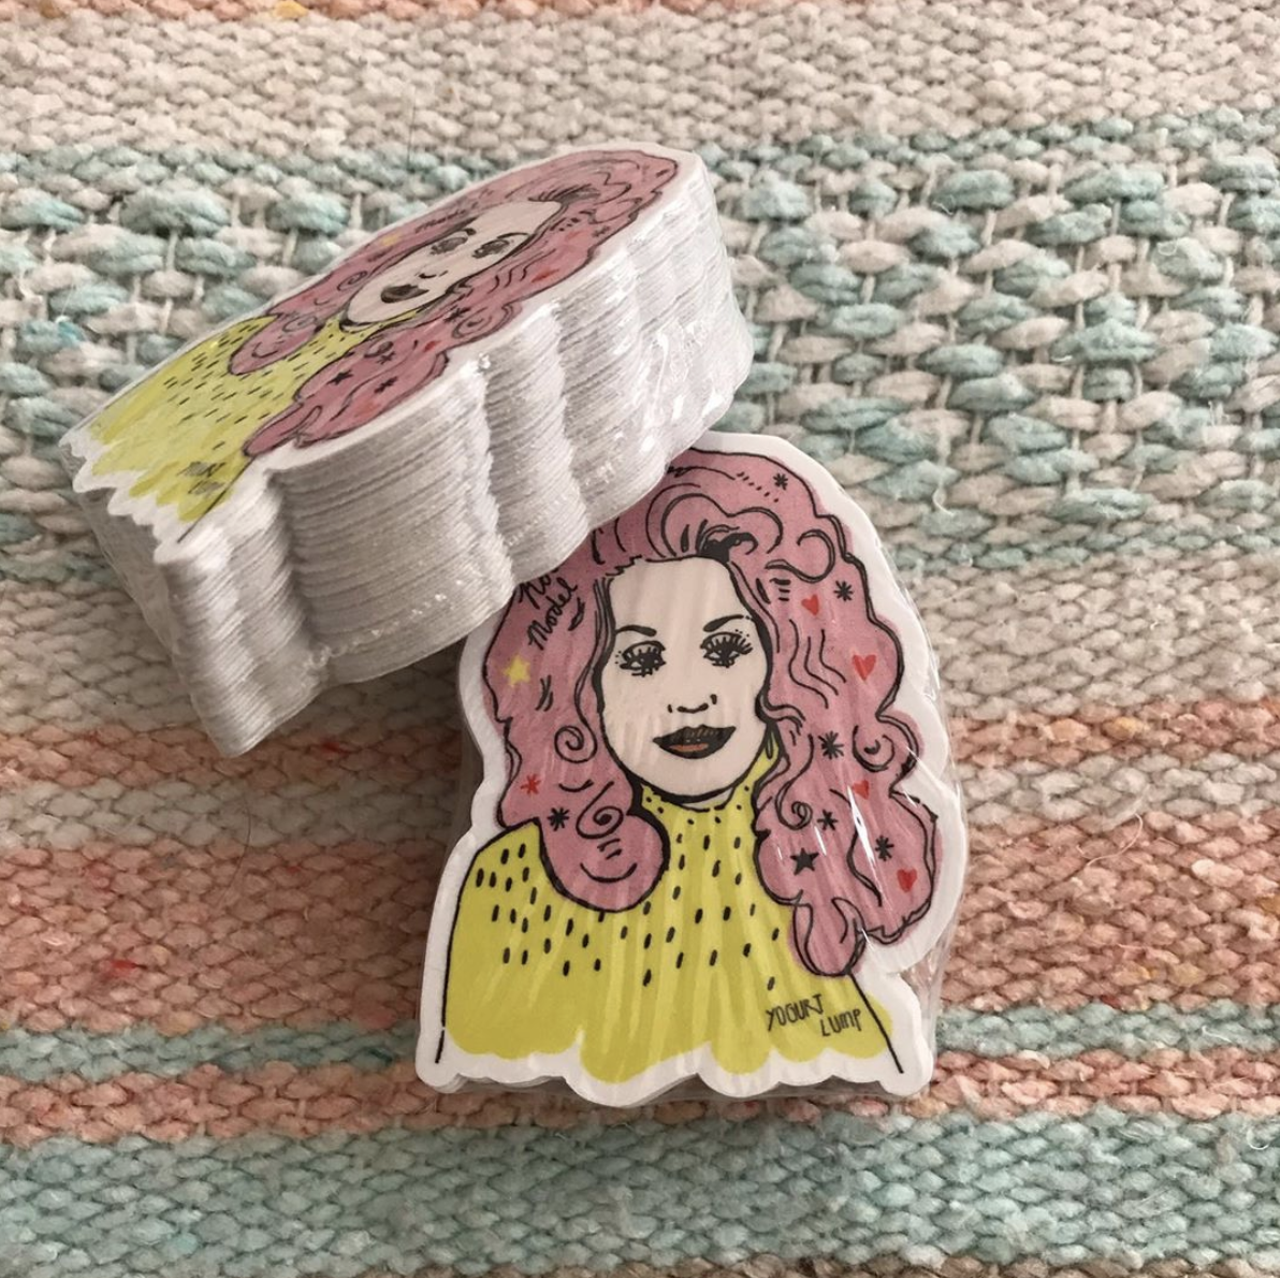 @yogurtlump
Jen Frost Smith makes colorful illustrations, enamel pins, stickers and more as Yogurt Lump. Smith's Dolly Parton illustration is also Ruby City's 2020 Fiesta Medal. 
Photo via Instagram / yougurtlump